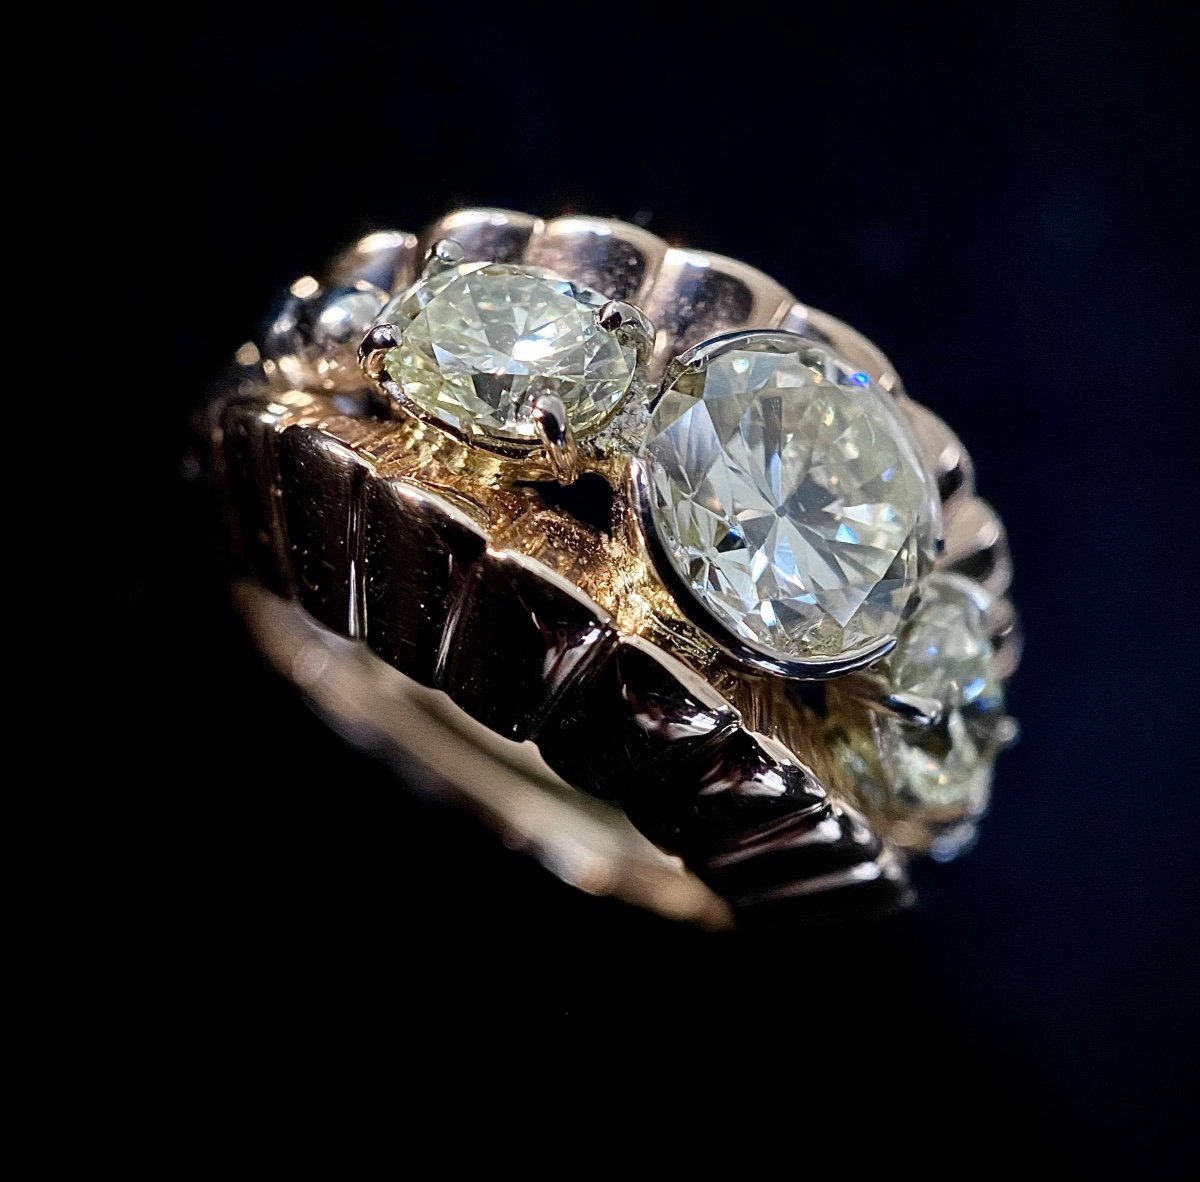 Ring Set With A Central Brilliant Of 1.40 Carats (si-i/j) + 2 Oval Cut Diamonds 1 Carat